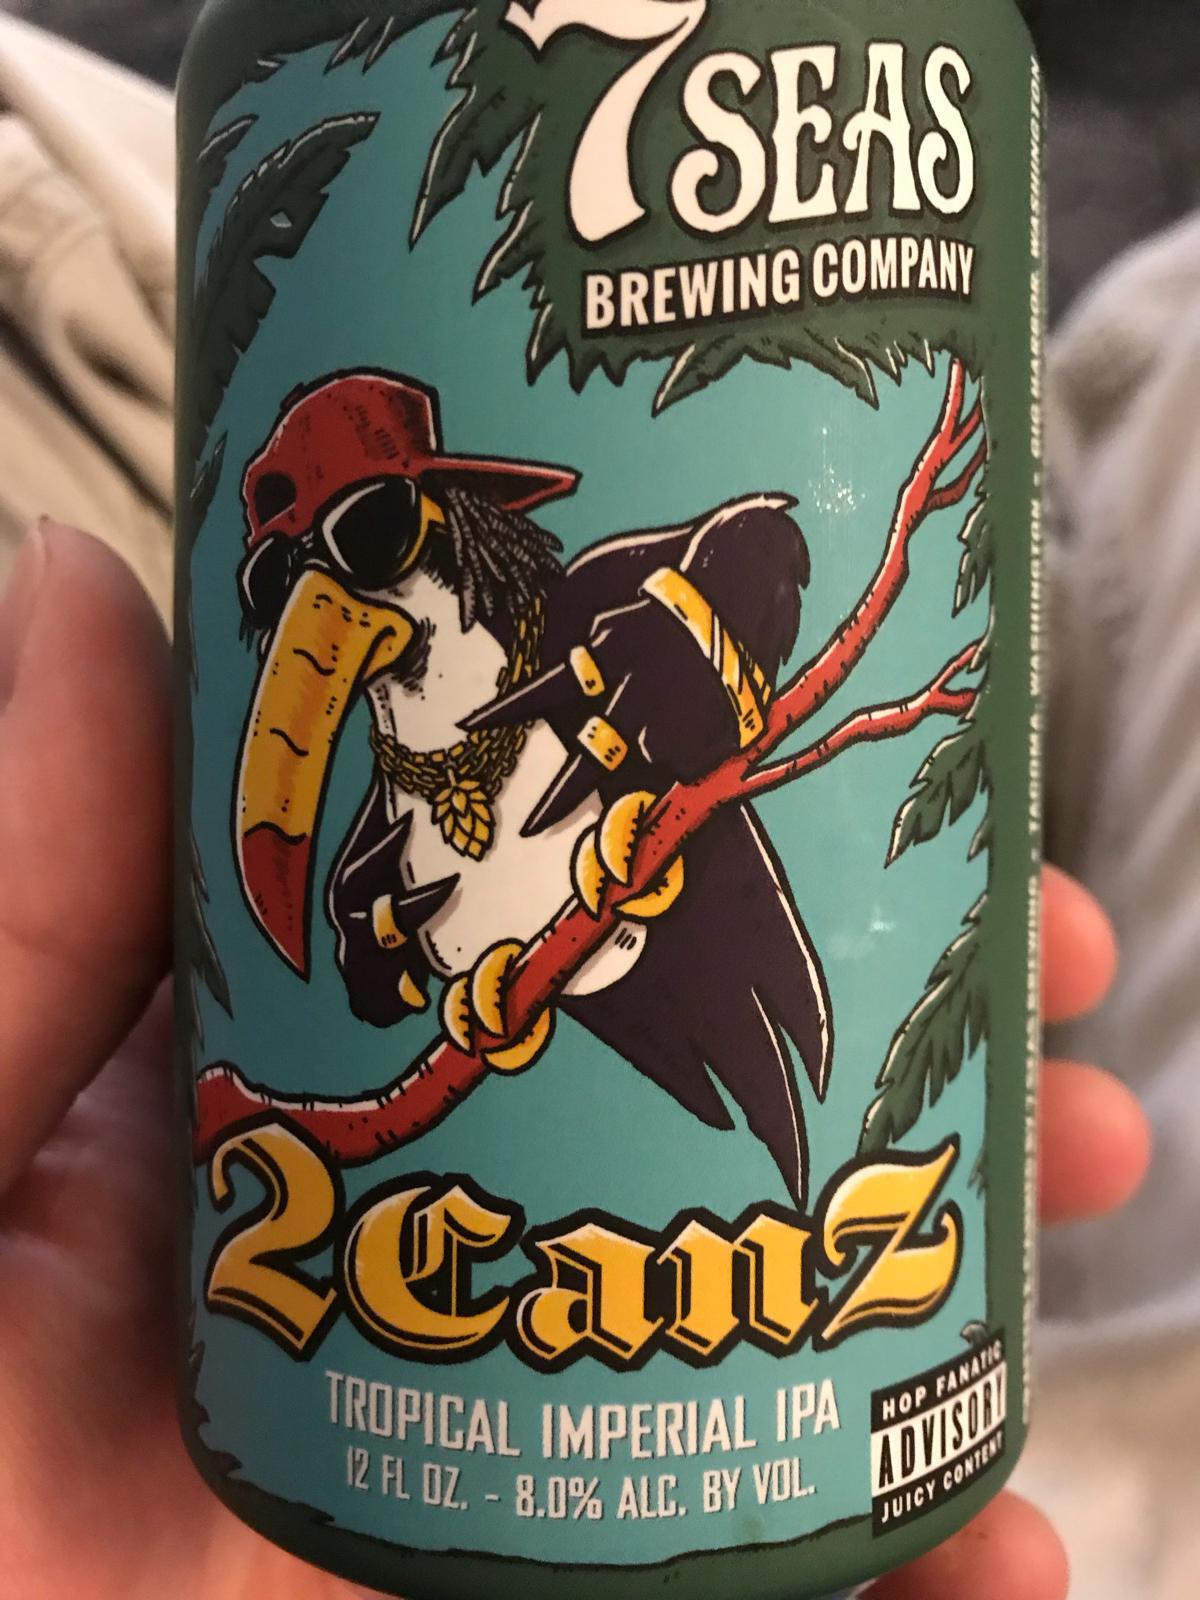 2 Canz Tropical Imperial IPA